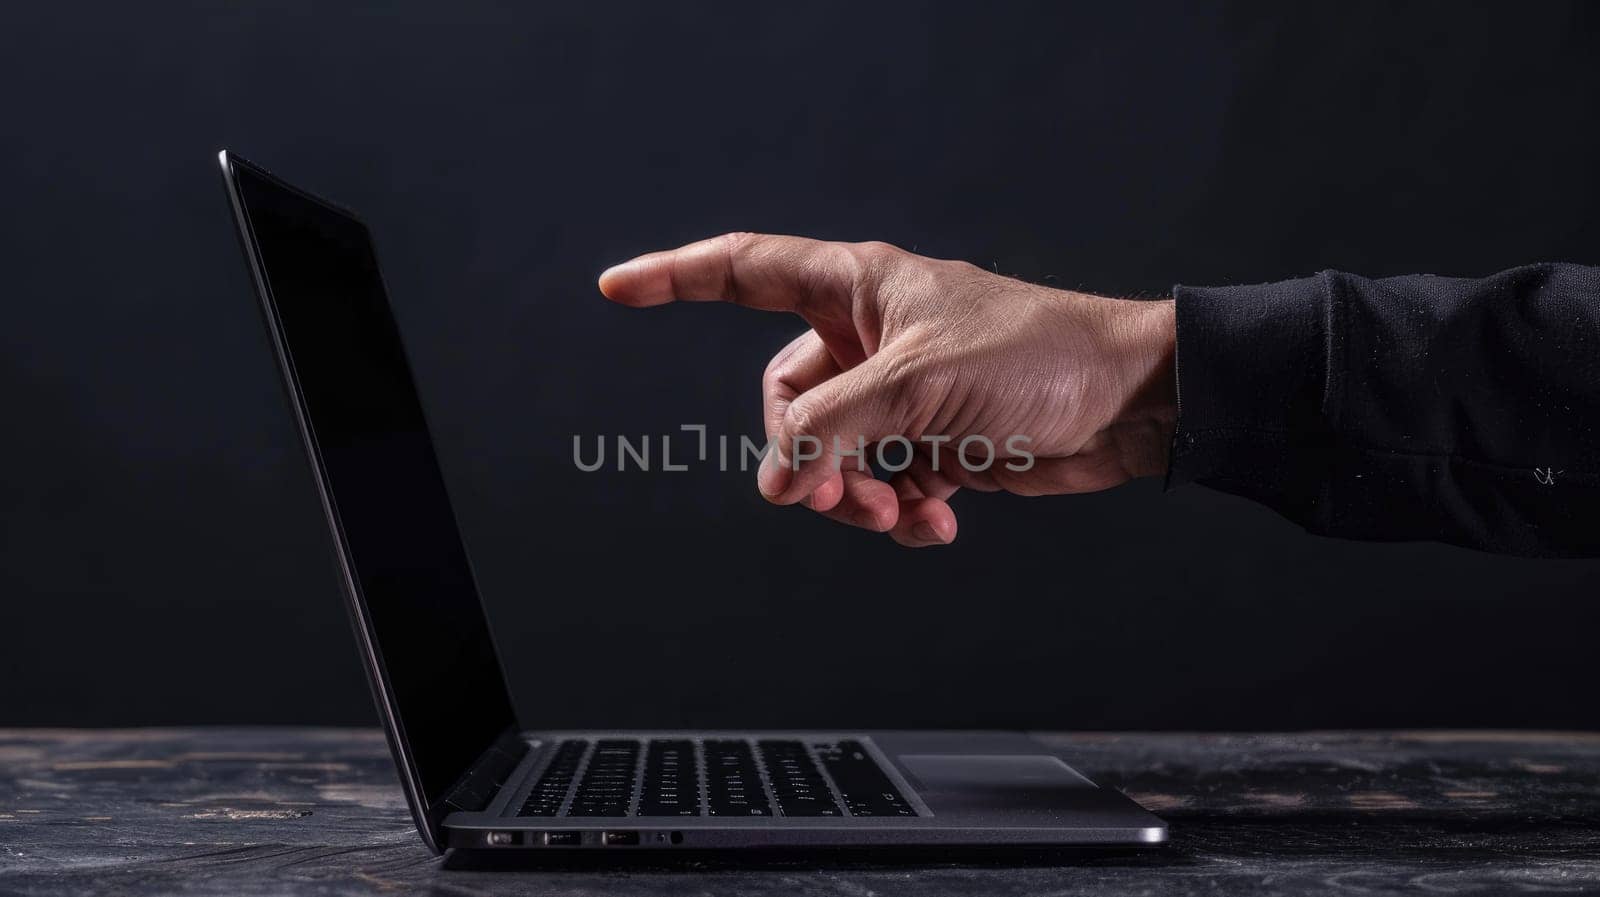 A hand reaching out to a laptop, Connection through technology.